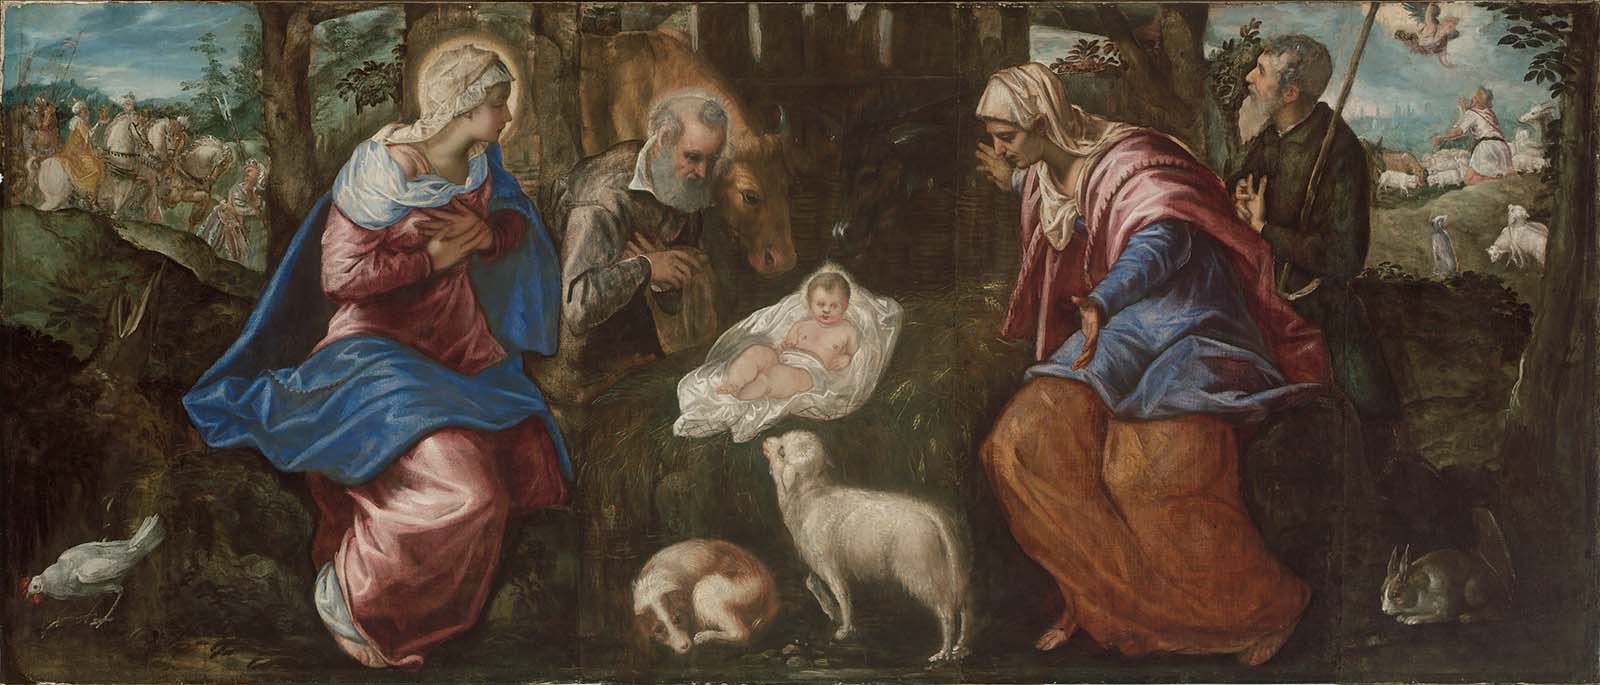 Jacopo Tintoretto (Jacopo Robusti), The Nativity, Italian, late 1550s (reworked, 1570s), oil on canvas, 155.6 x 358.1 cm. Museum of Fine Arts, Boston: gift of Quincy Shaw, accession number 46.1430. Photograph © 2016 Museum of Fine Arts, Boston.